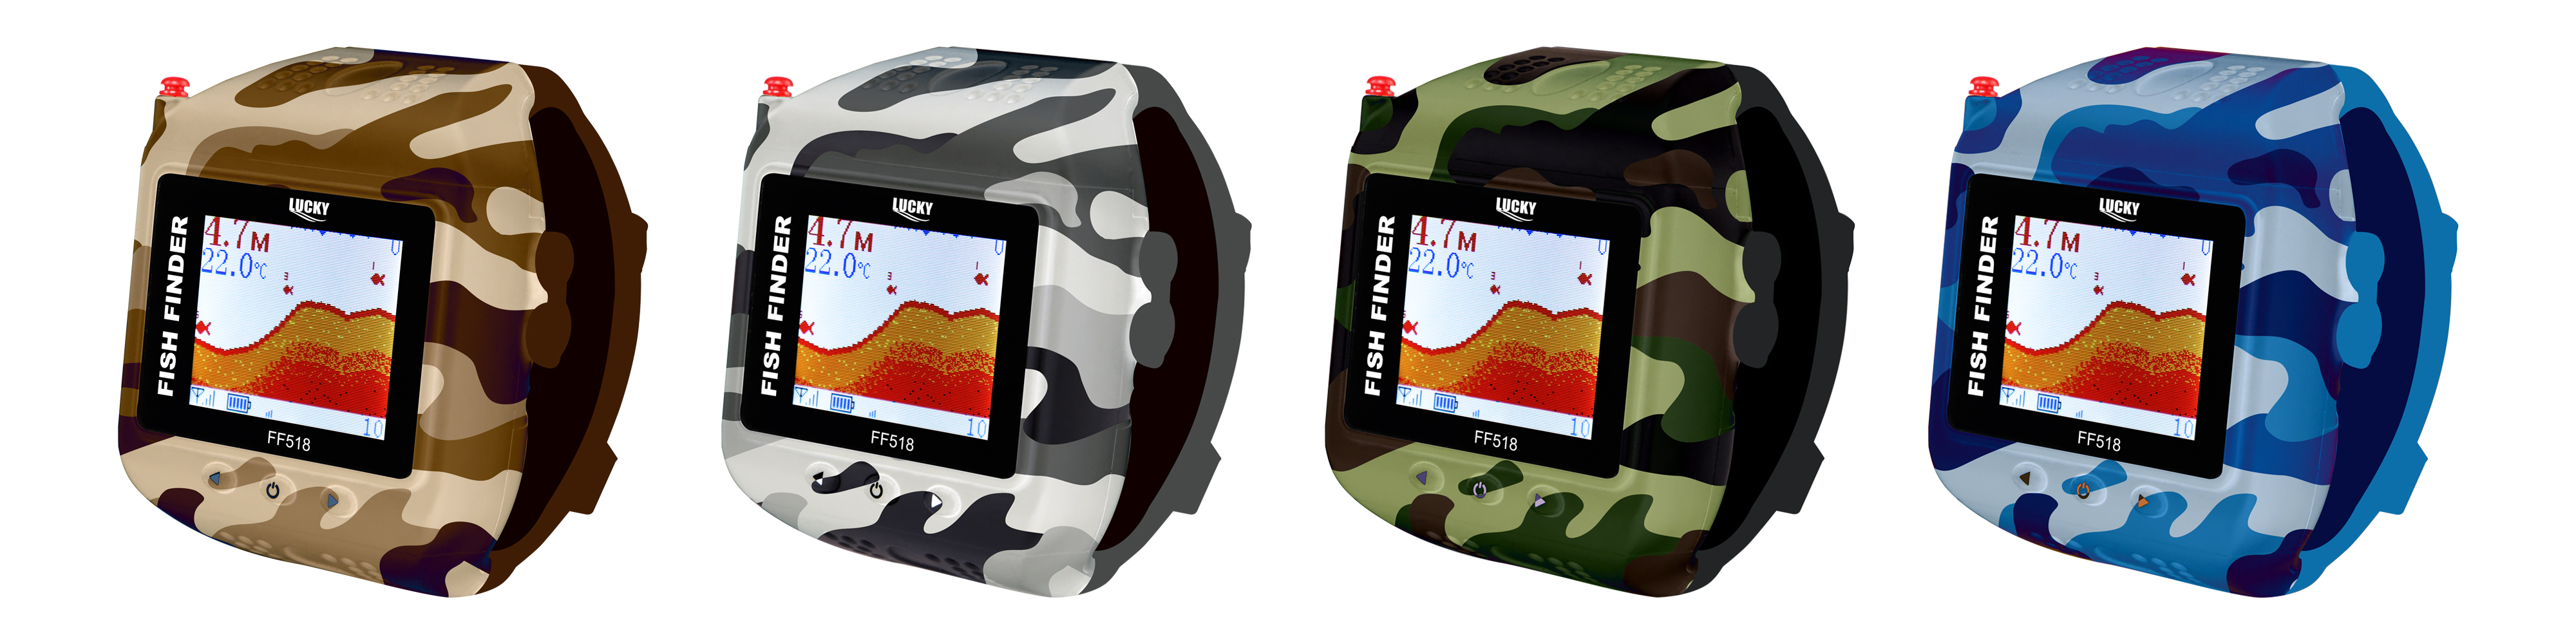 wearable fish finder 